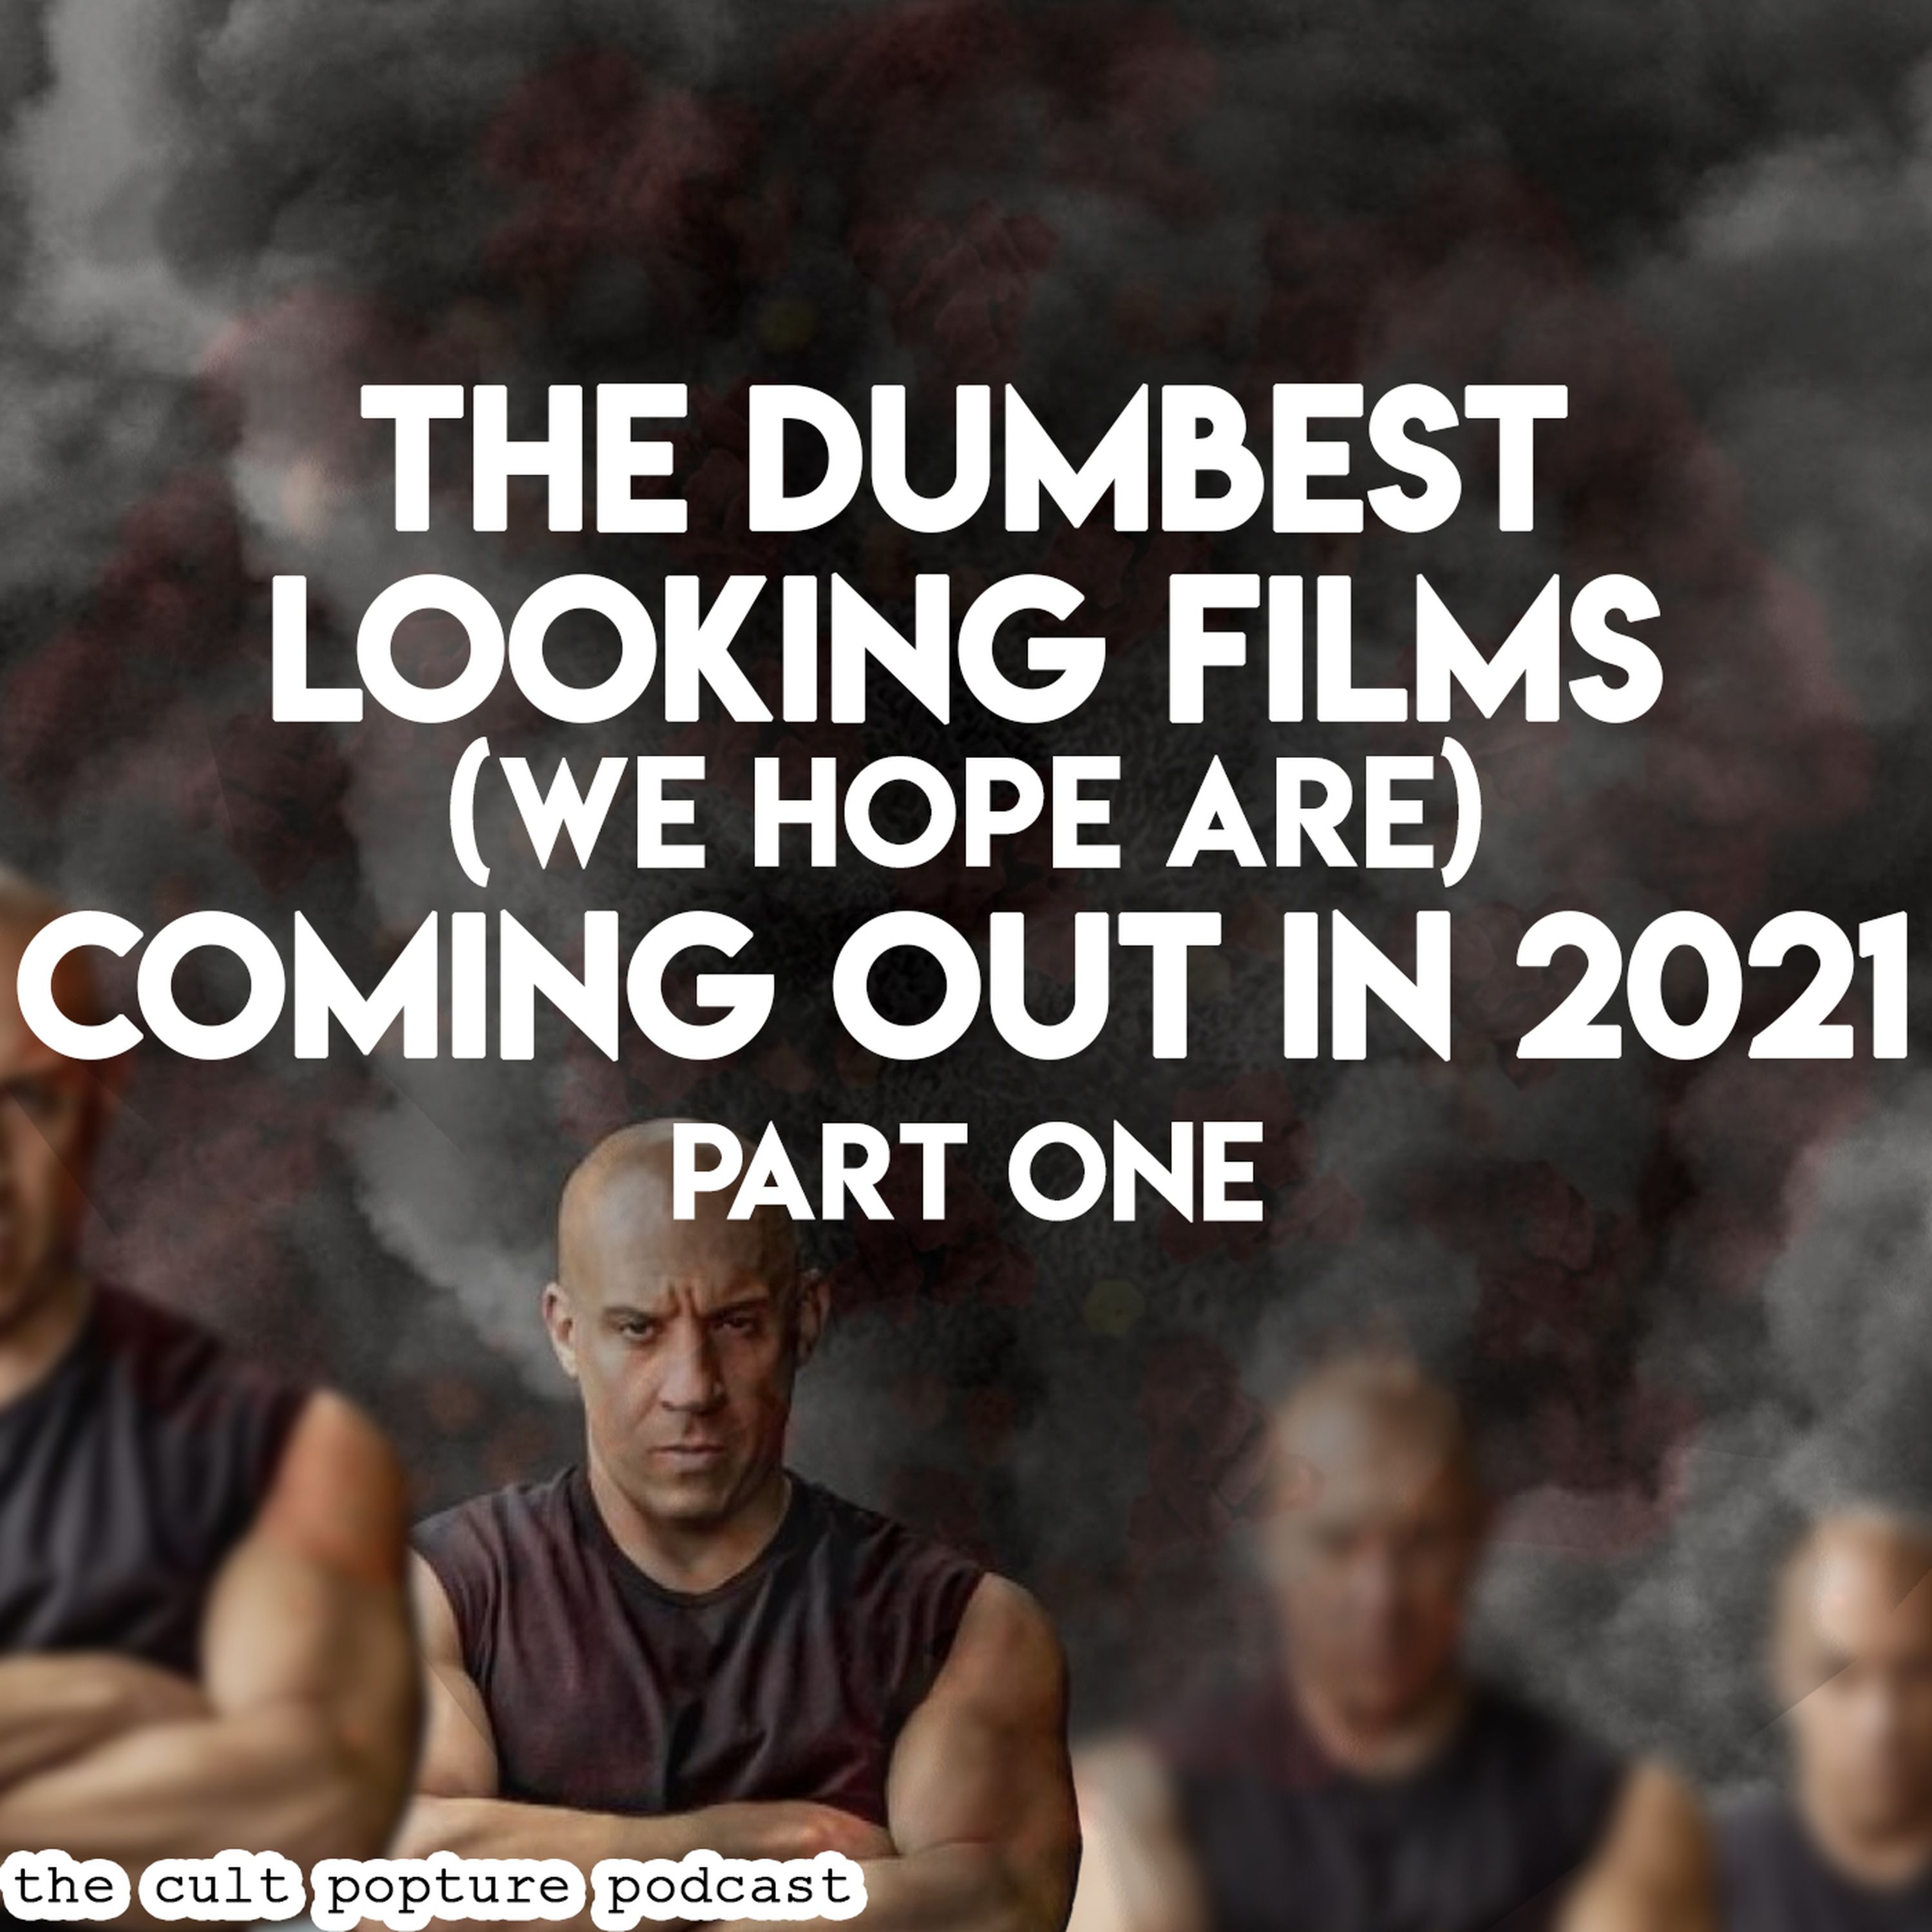 The Dumbest Looking Films (We Hope Are) Coming Out in 2021 (part one) | The Cult Popture Podcast